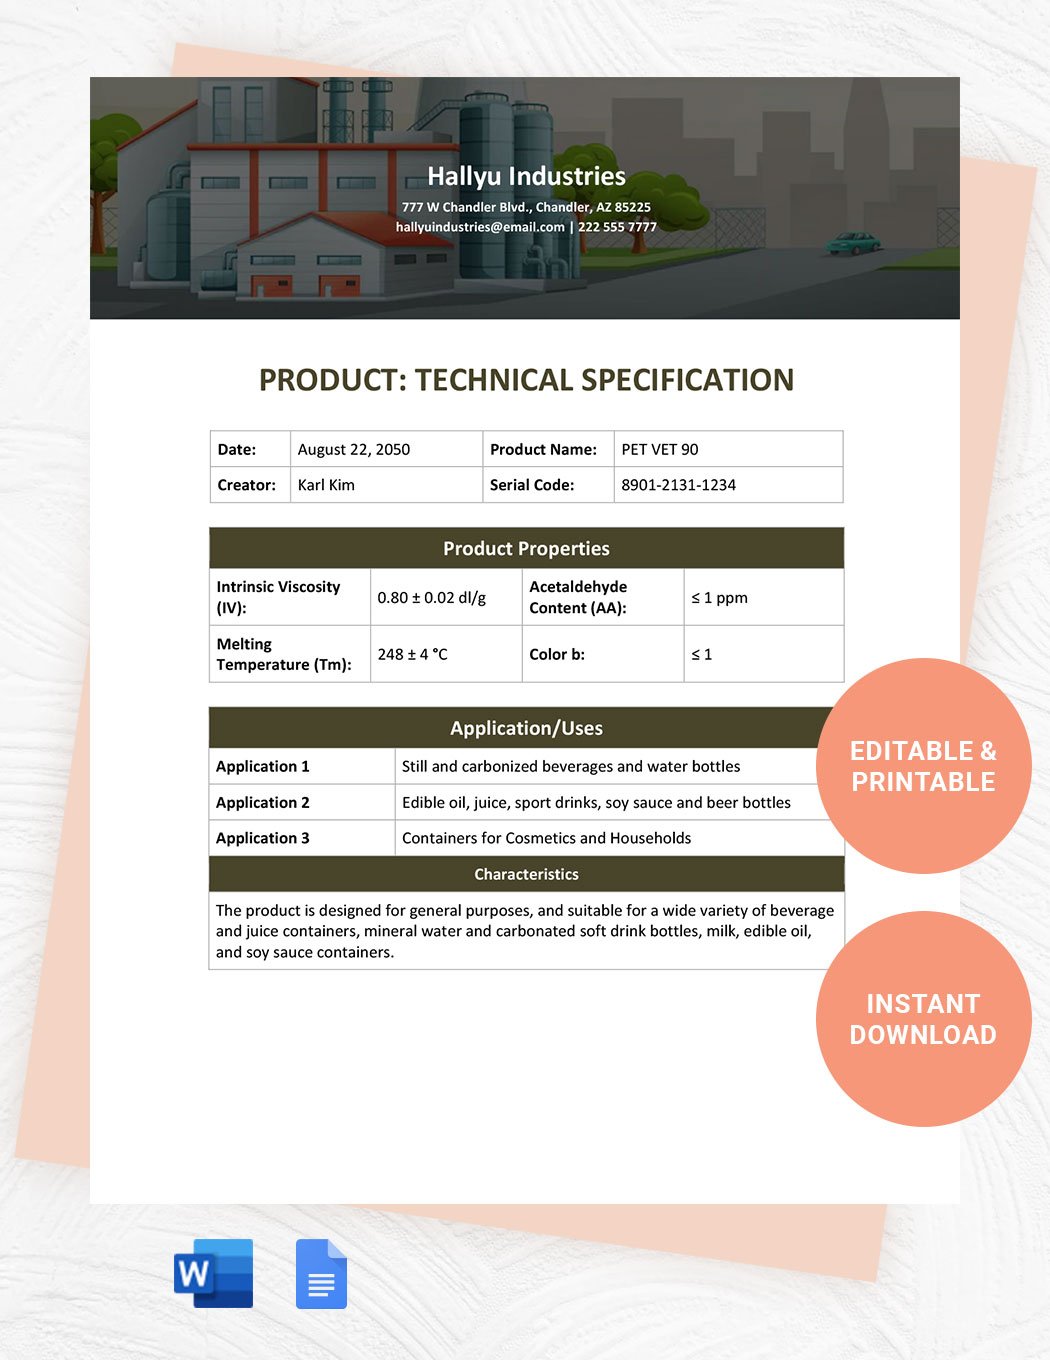 Product Technical Specification Template in Word, Google Docs